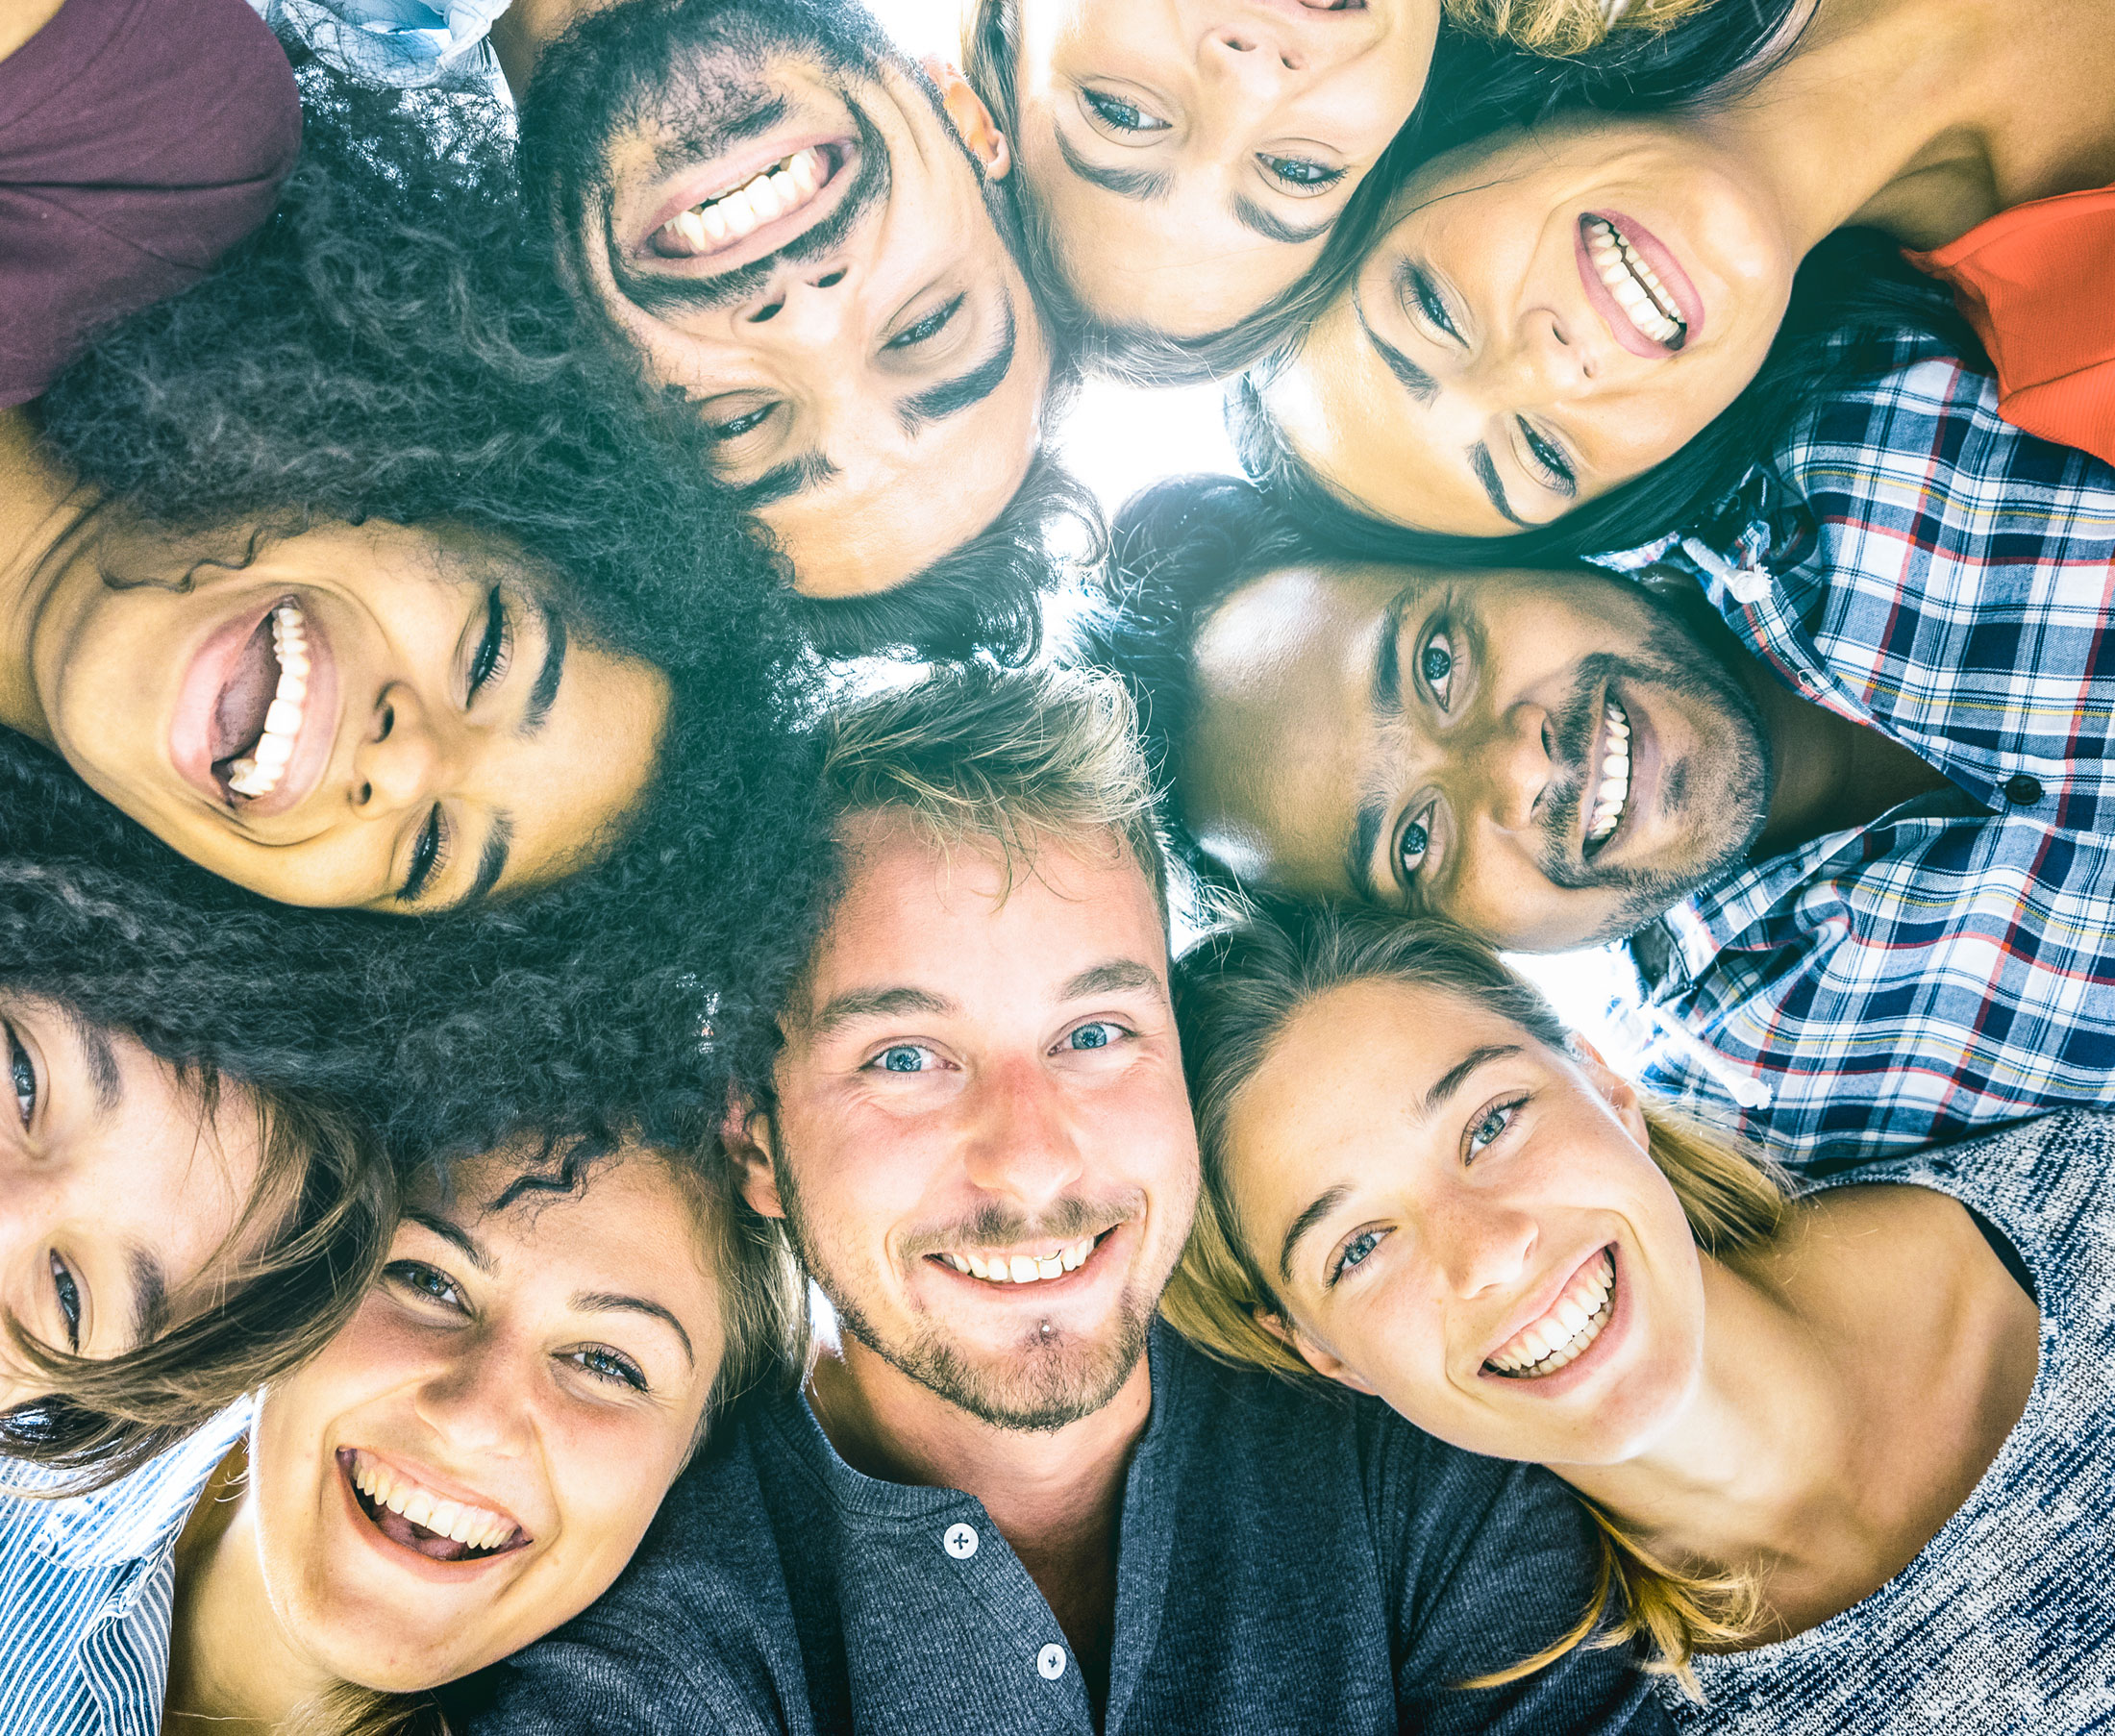 A group of people smiling together in a circle.